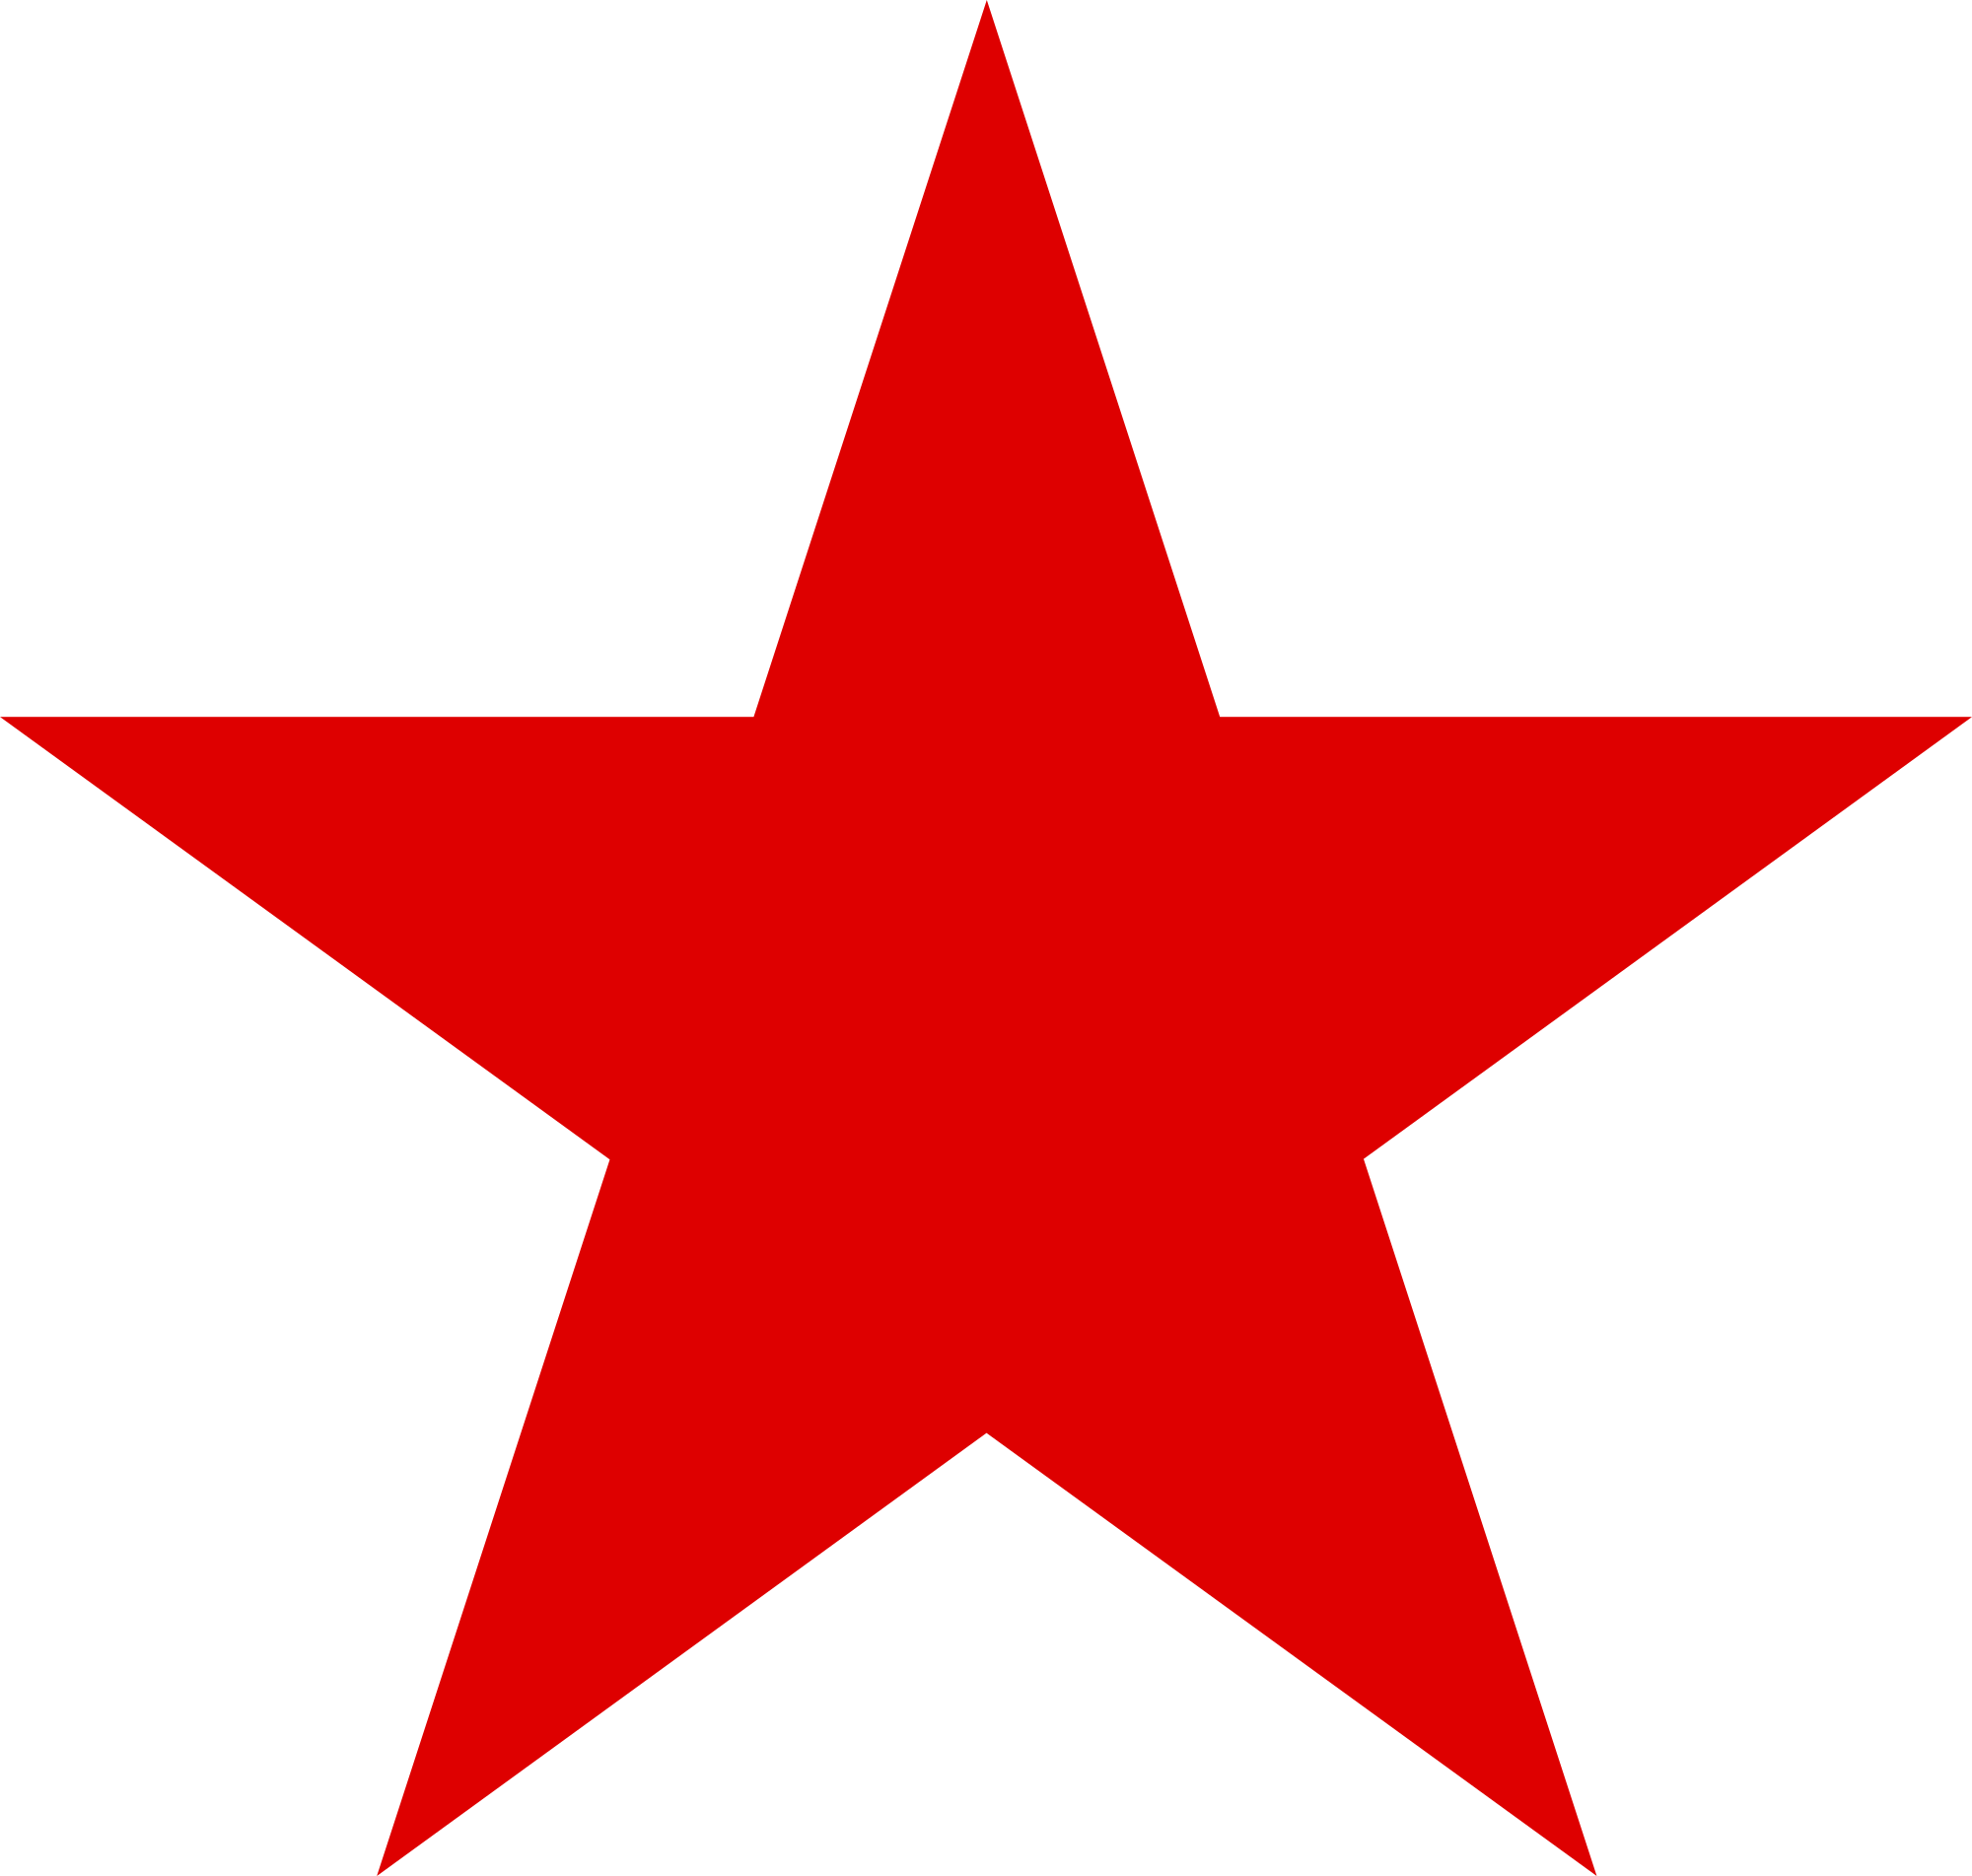 Red White and Black Star Logo - Red star